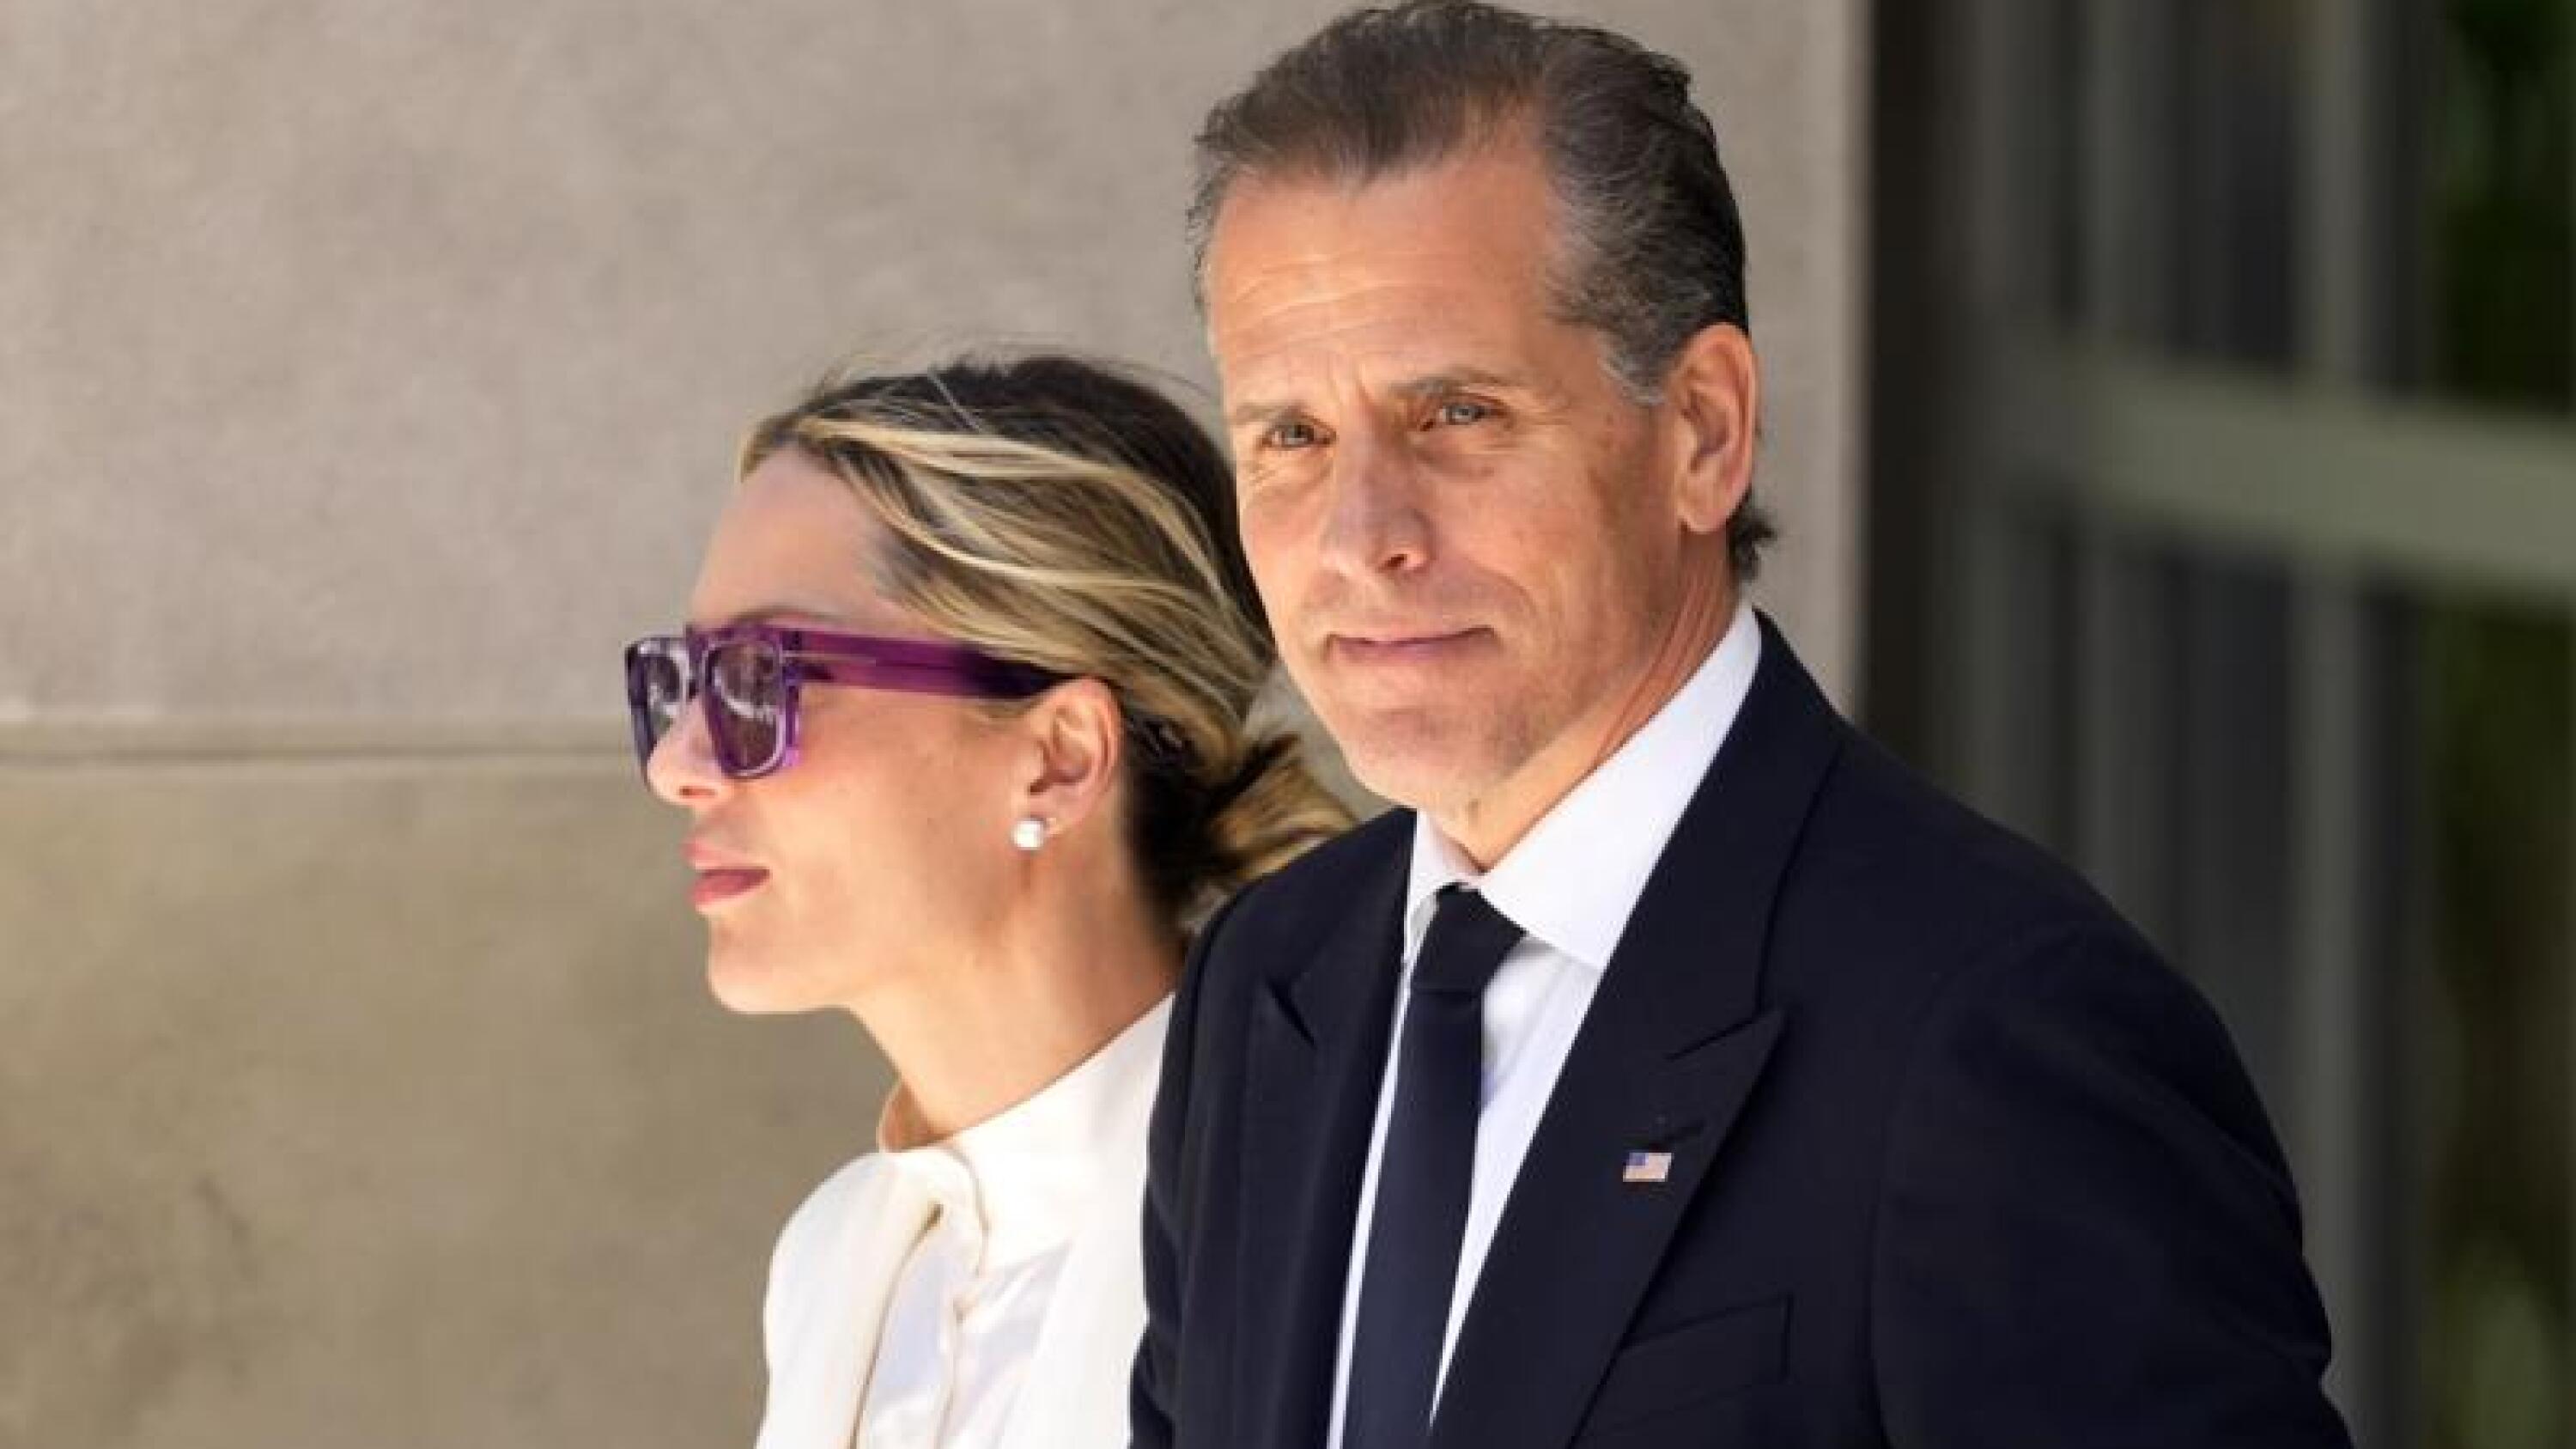 Hunter Biden's daughter testifies about her father in his federal gun trial